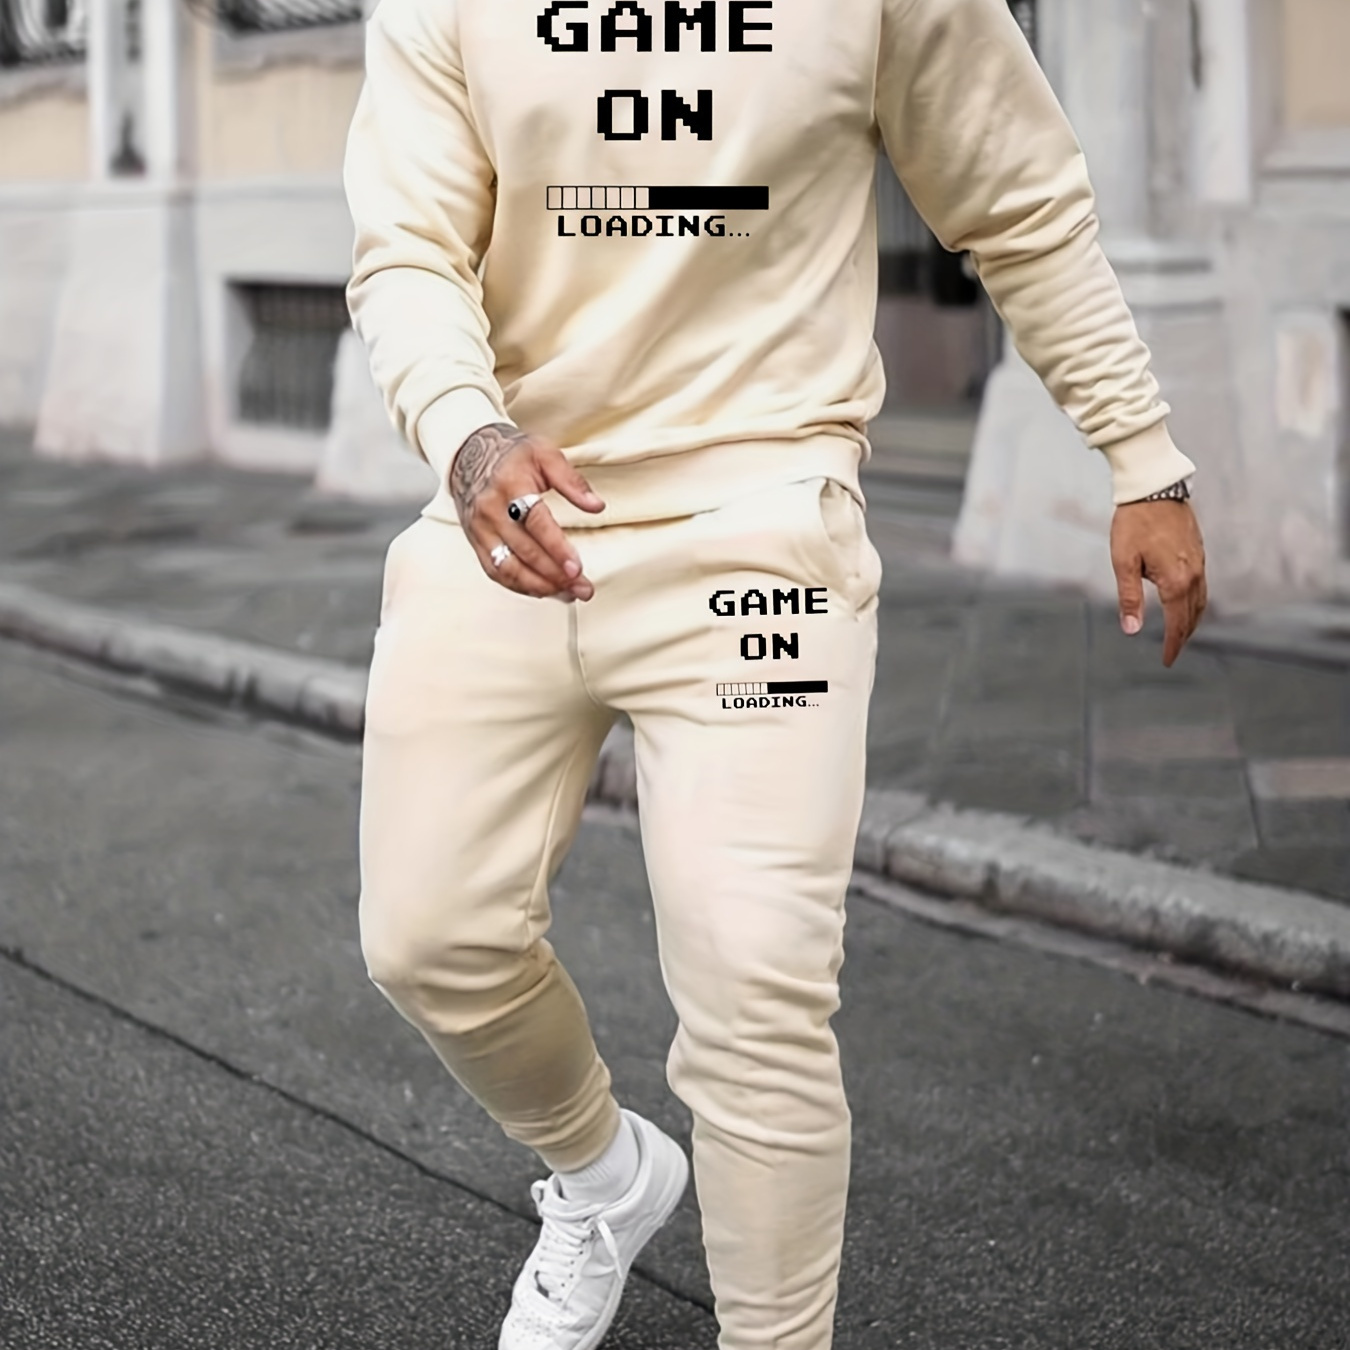 

Men's 2pcs Outfits, Game Loading Print, Casual Long Sleeve Crew Neck Pullover Sweatshirt And Drawstring Sweatpants Joggers Set For Spring Fall, Men's Clothing